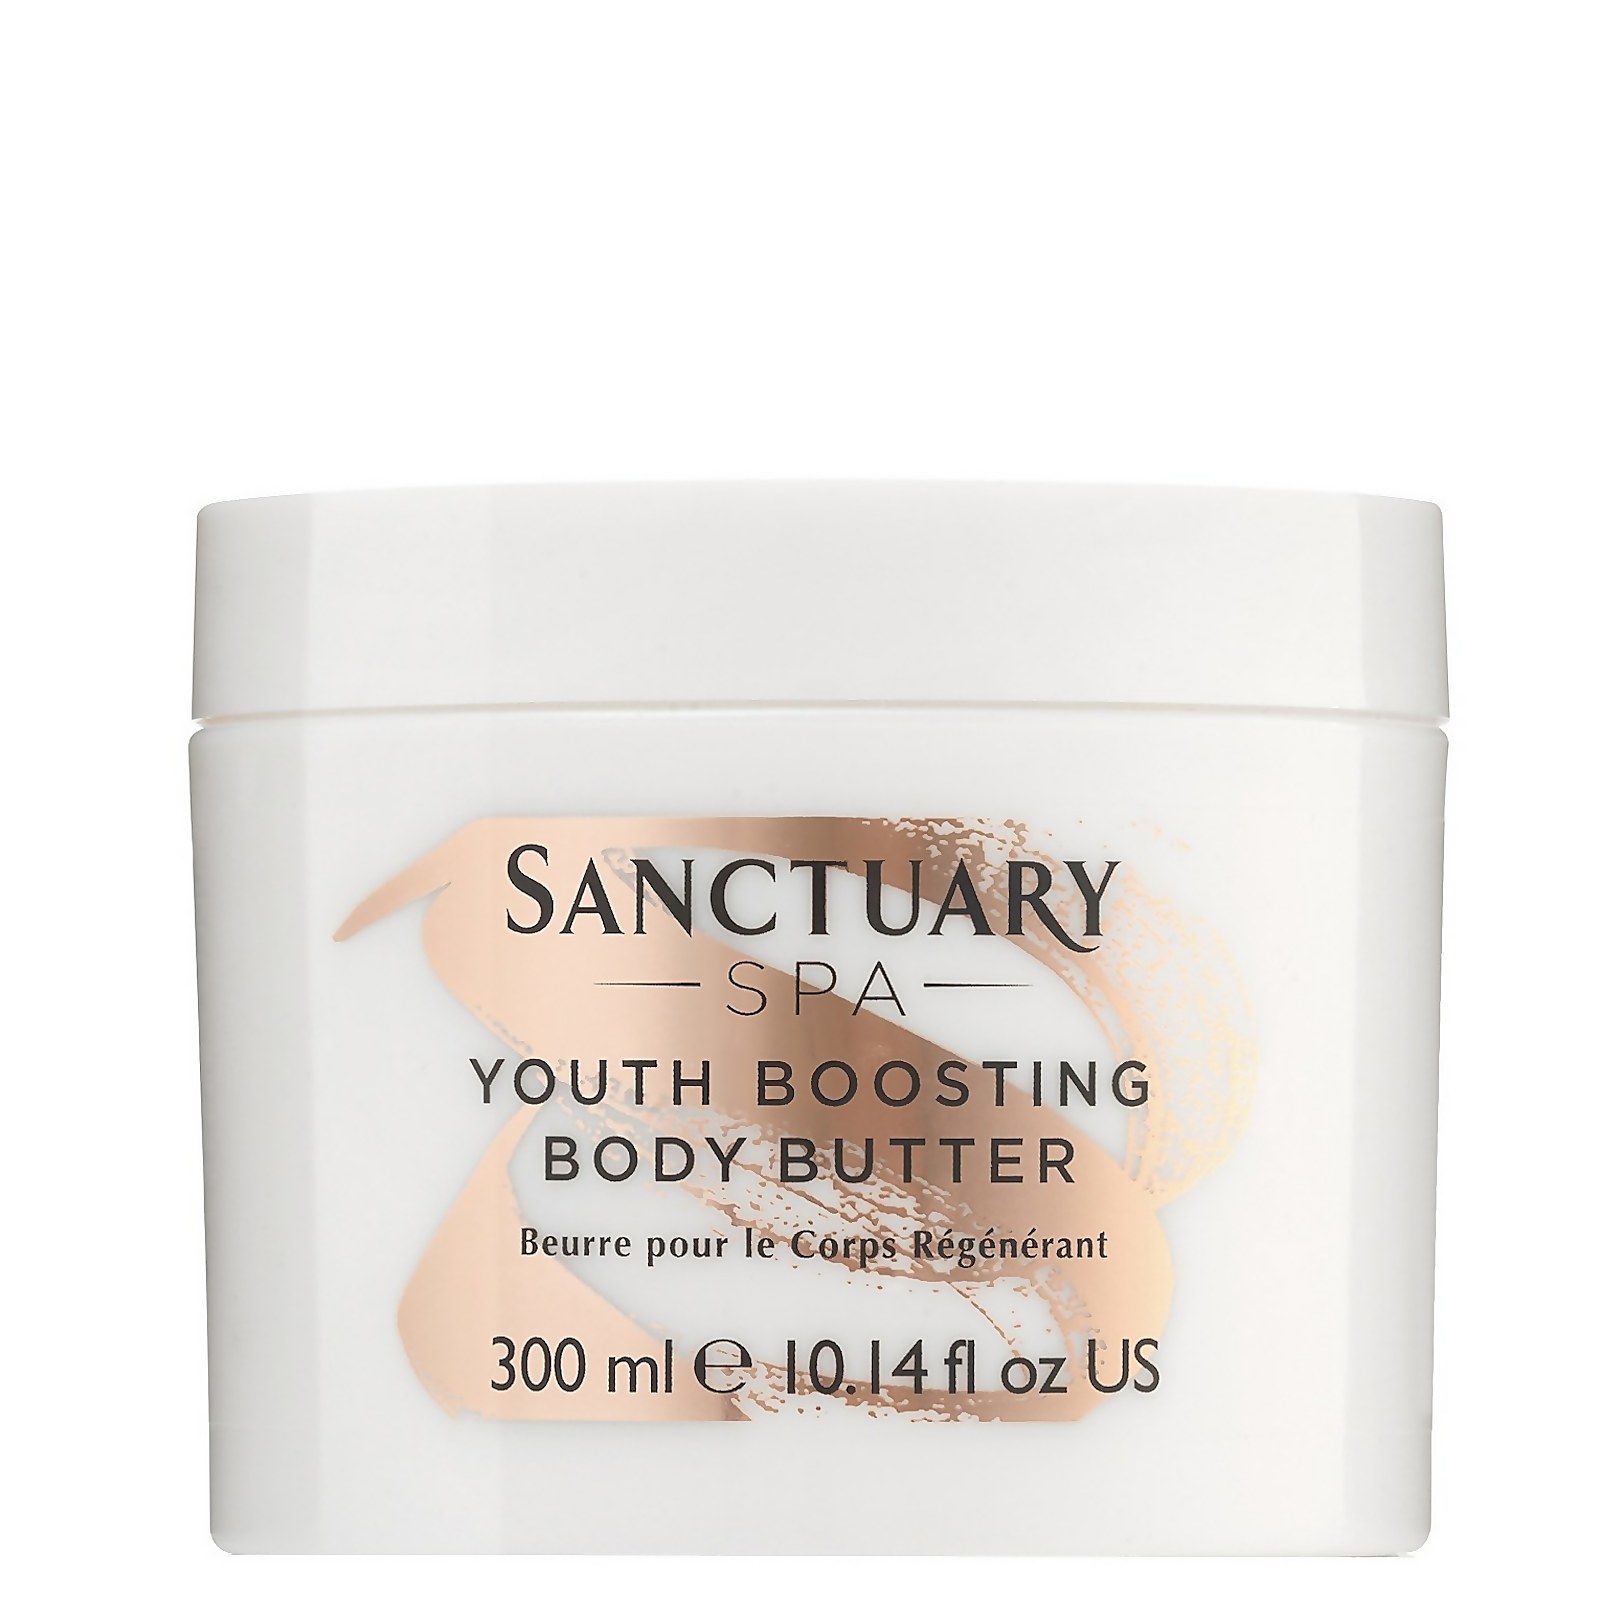 Sanctuary Spa Youth Boosting Body Butter 300 ml von Sanctuary Spa